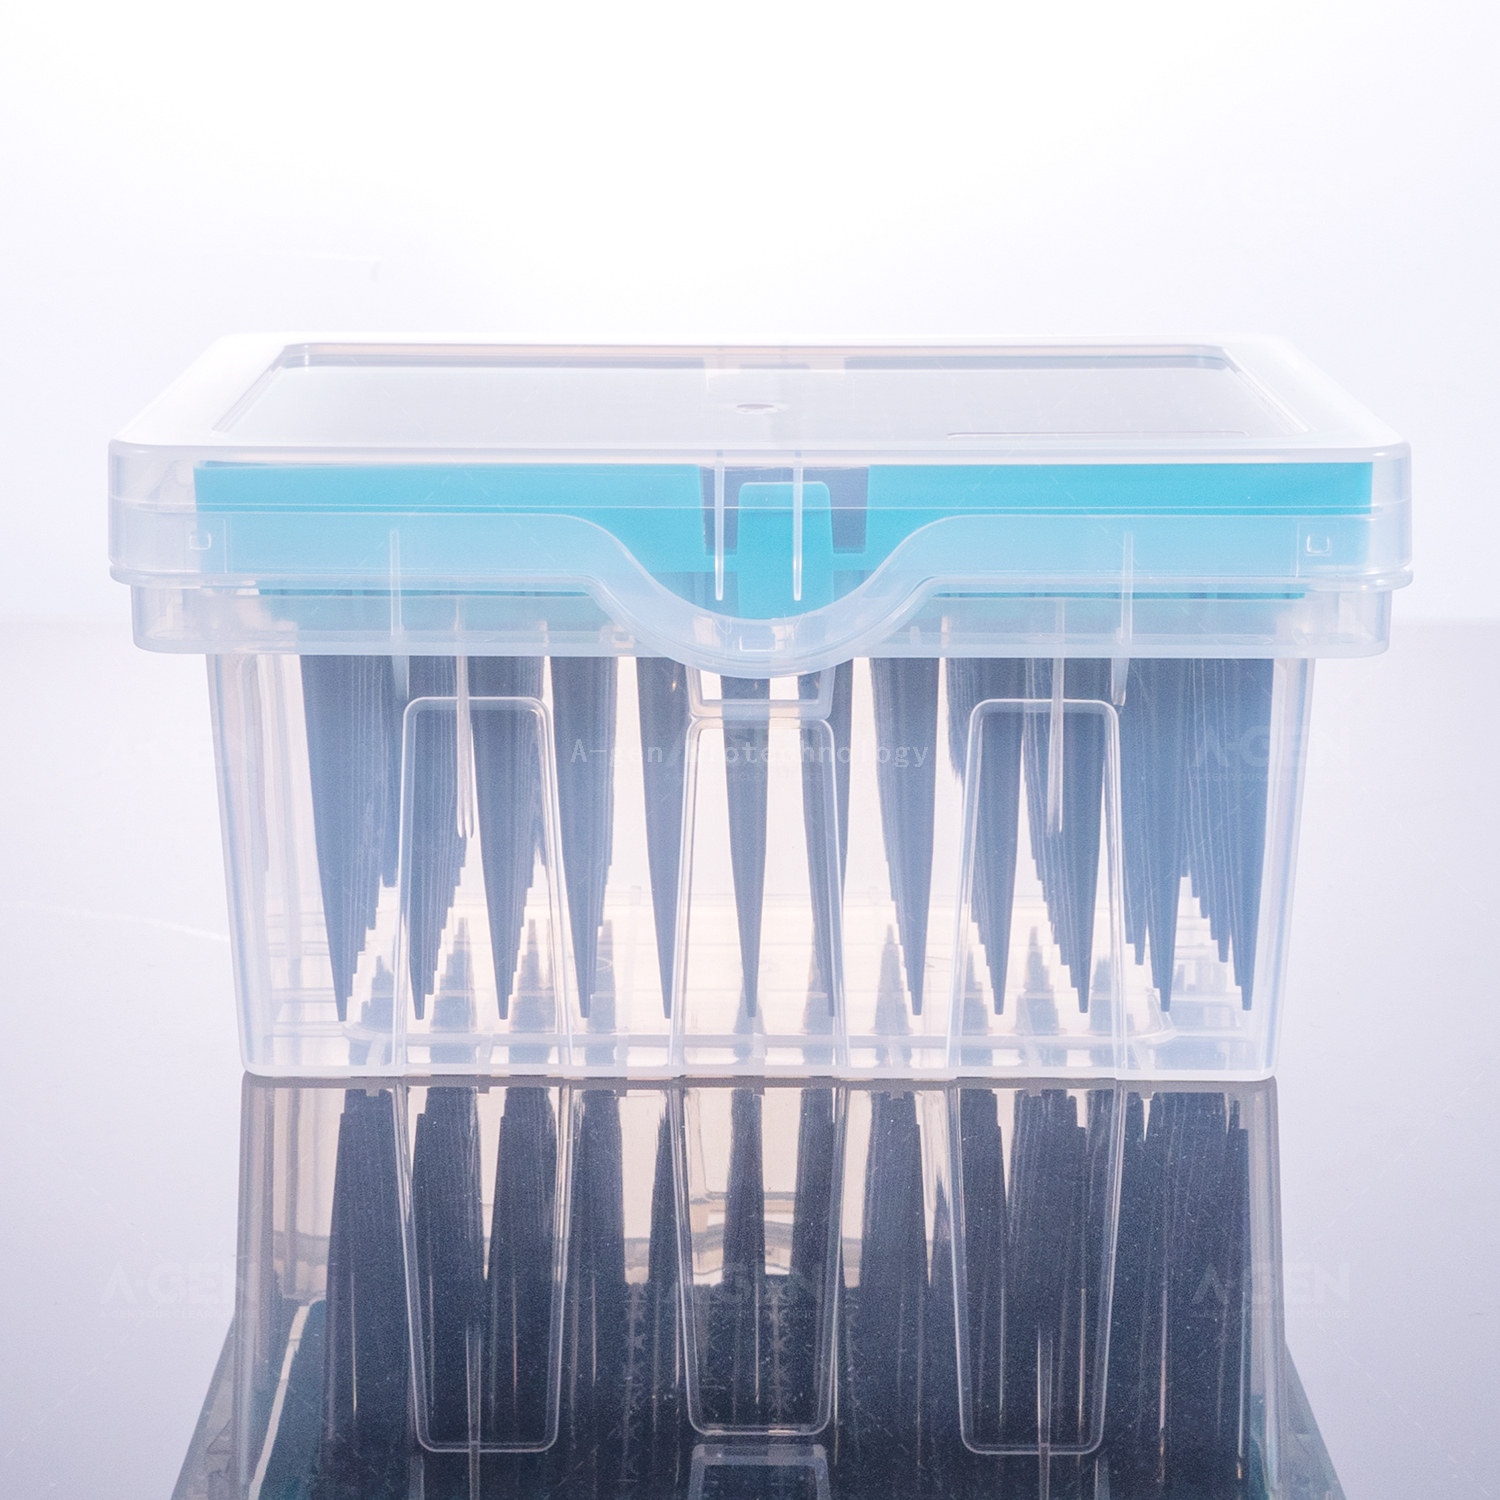 Hamilton Filter Pipette Tip Conductive 300μL Black PP Pipette Tip (Racked,sterile) for Lab Consumables With Filter HTF-300C-RSL Low Retention Or Not